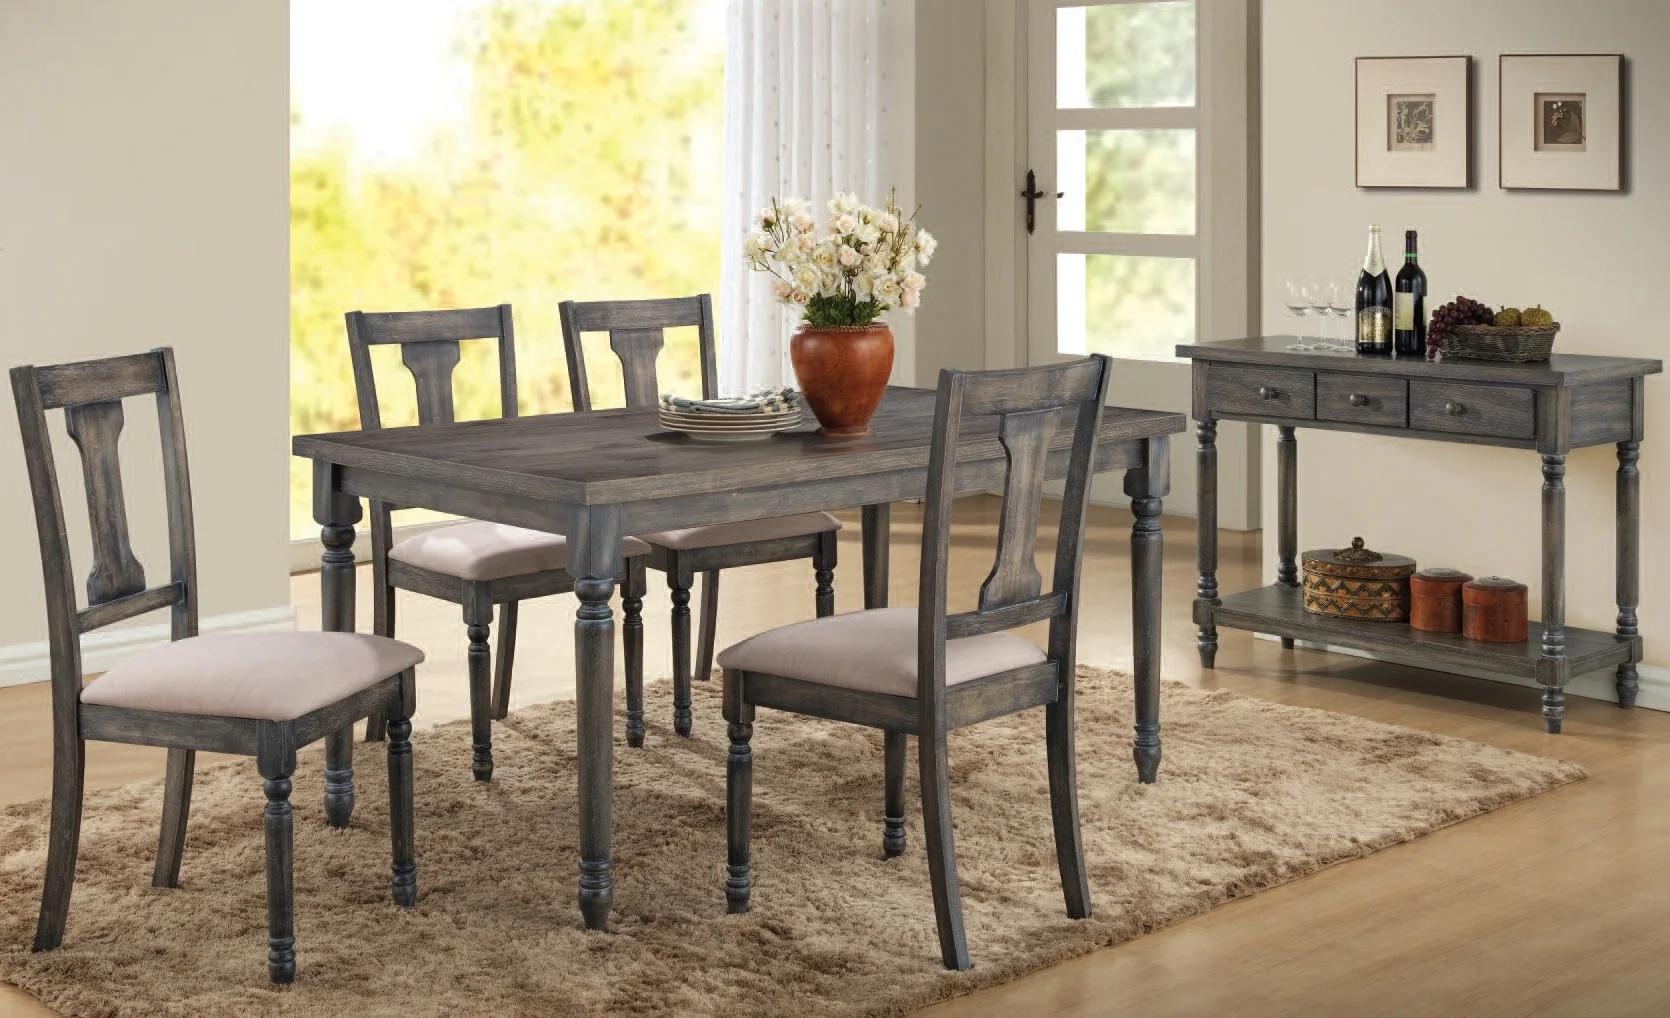 

    
Rustic Weathered Gray Dining Table + 8x Chairs by Acme Wallace 71435-9pcs
